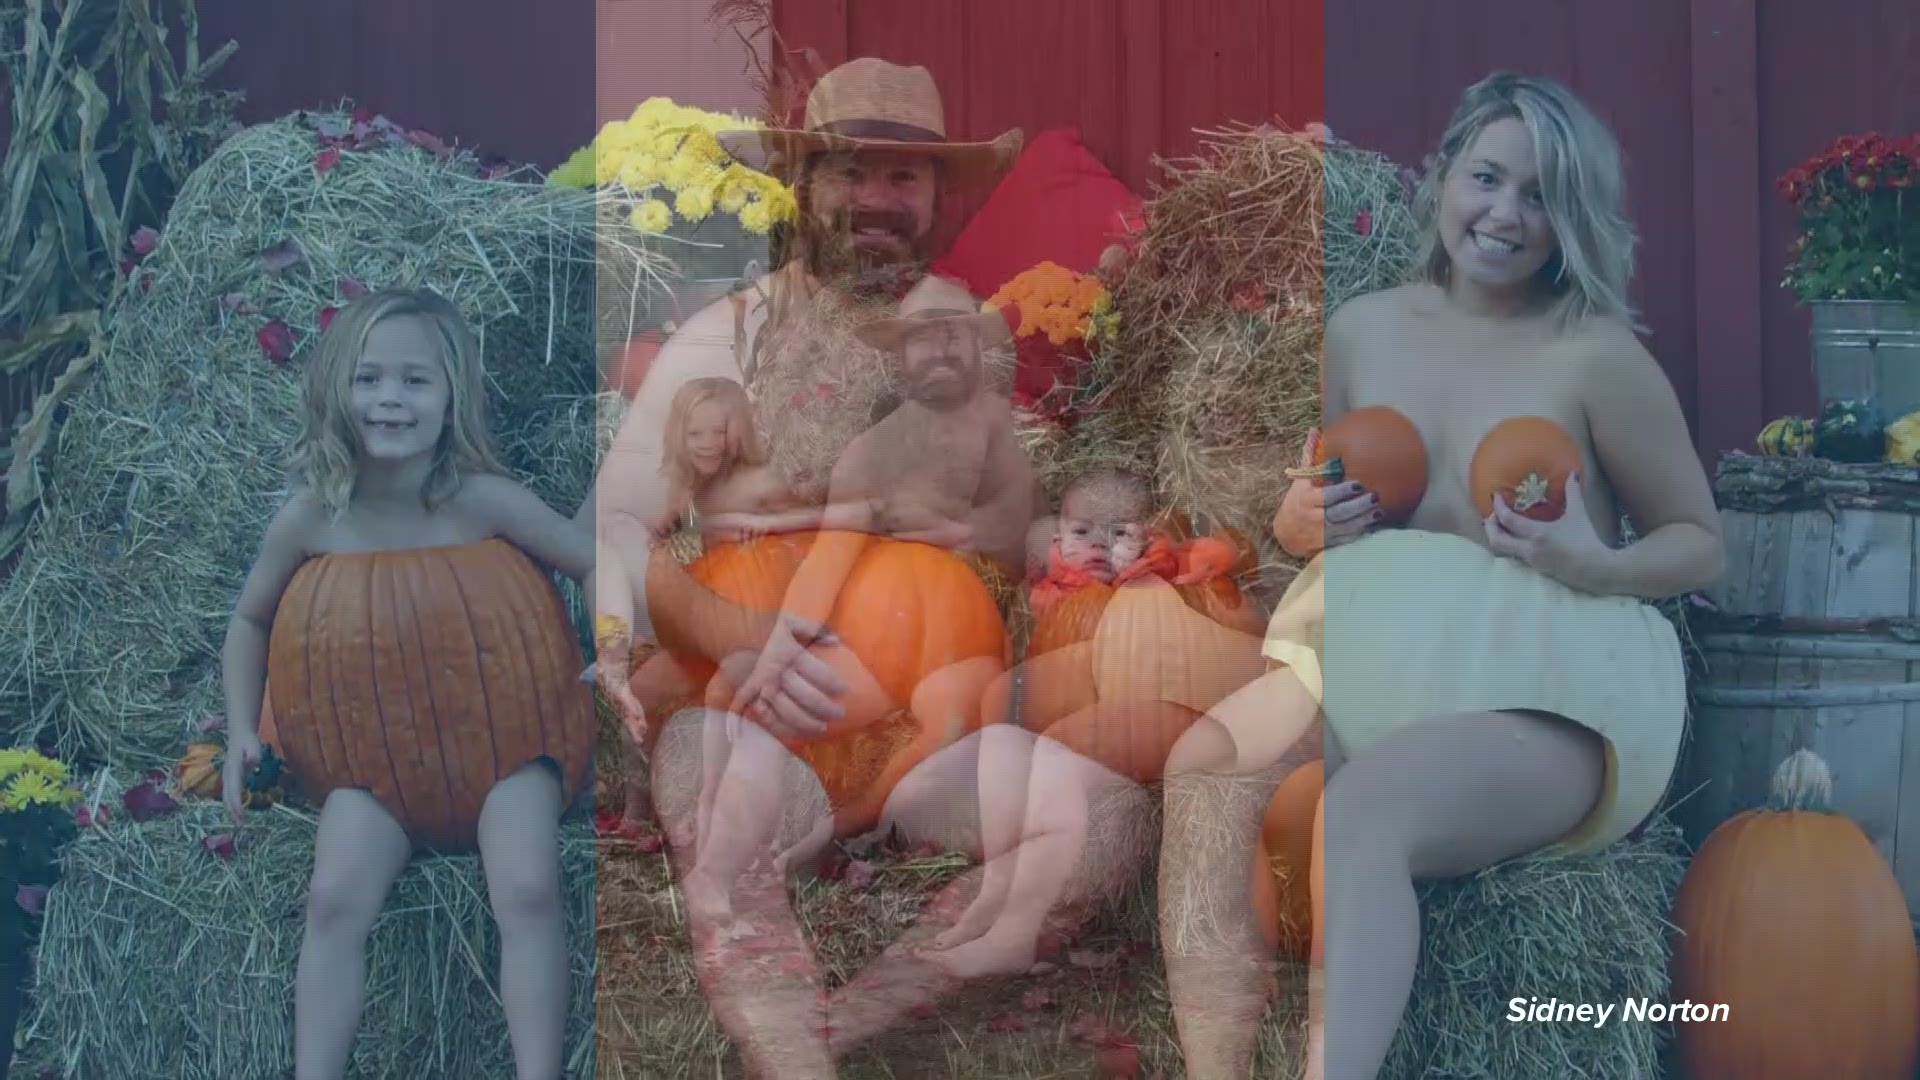 Family holiday photo of Mark and Sidney Norton of Nova Scotia and their two children has gone viral as they all wear pumpkins and nothing but pumpkins.